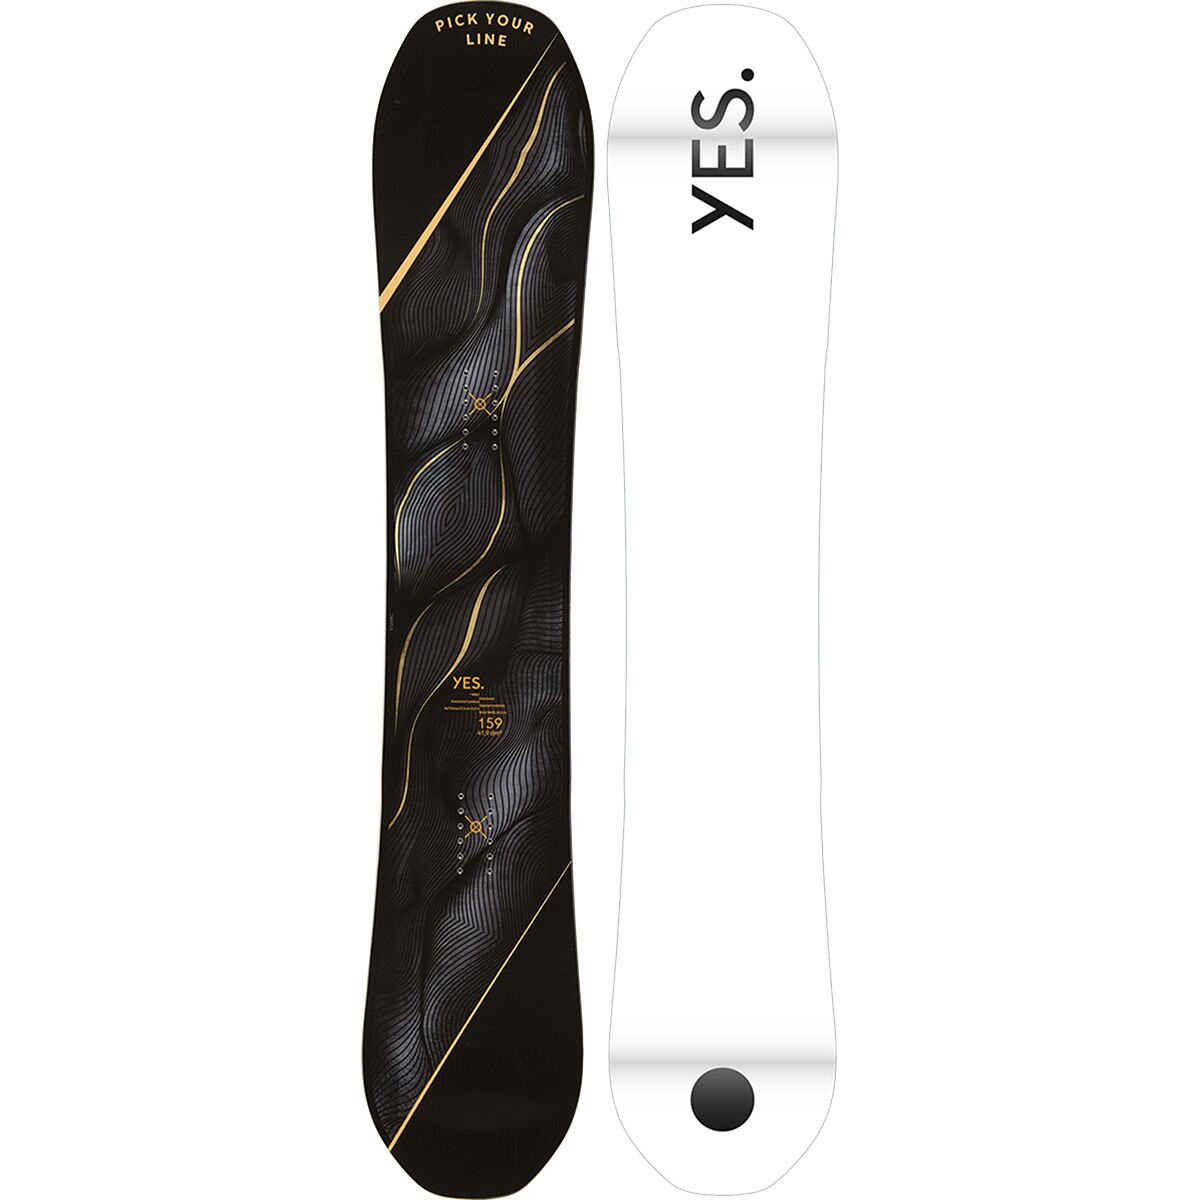 Yes. Pick Your Line Snowboard - 2023